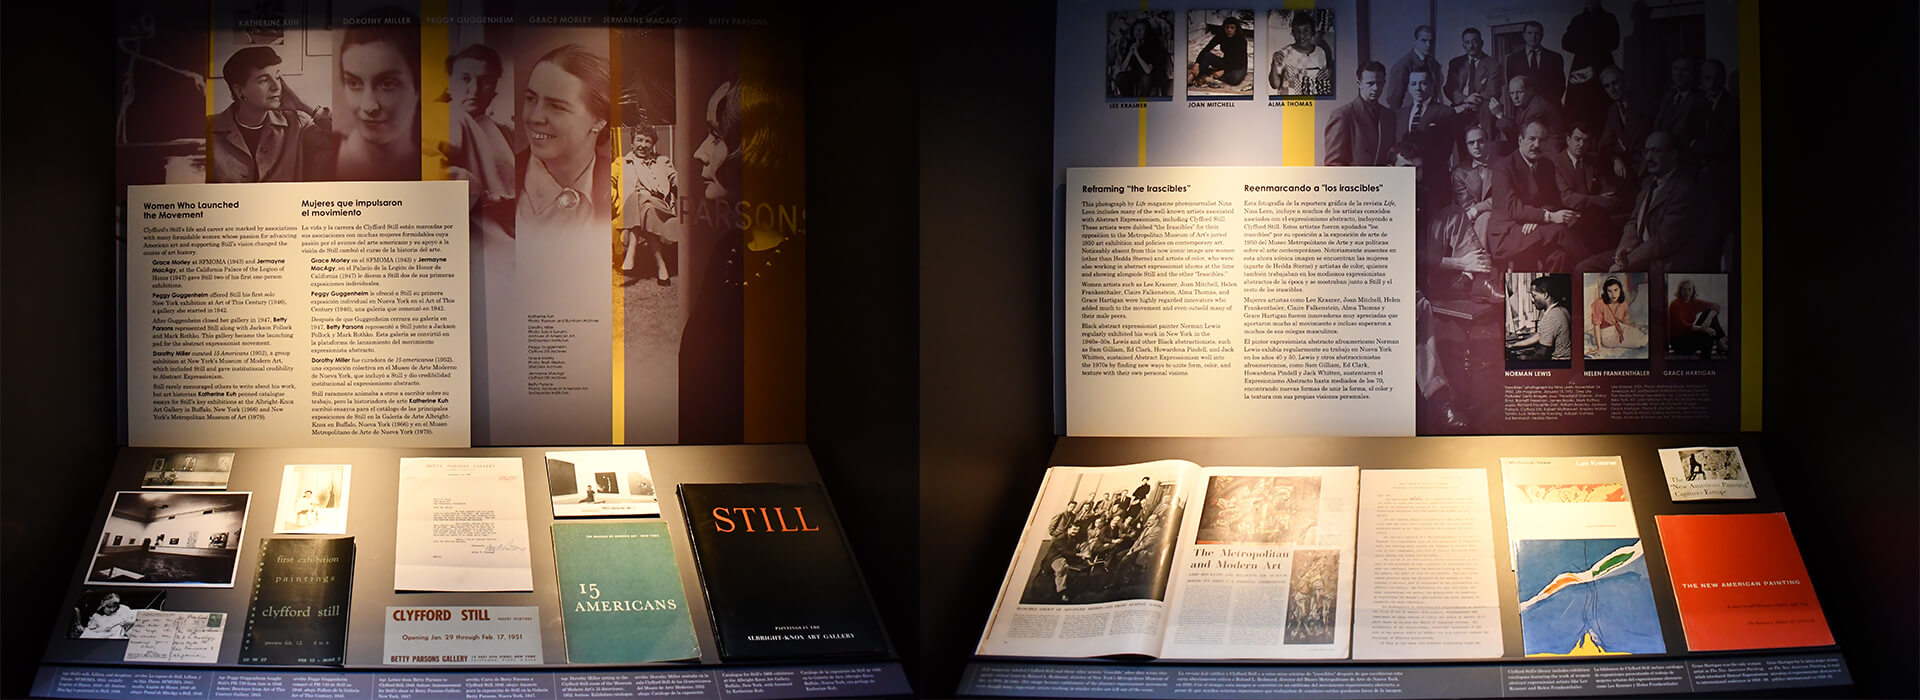 Two display cases include photographs and archival materials